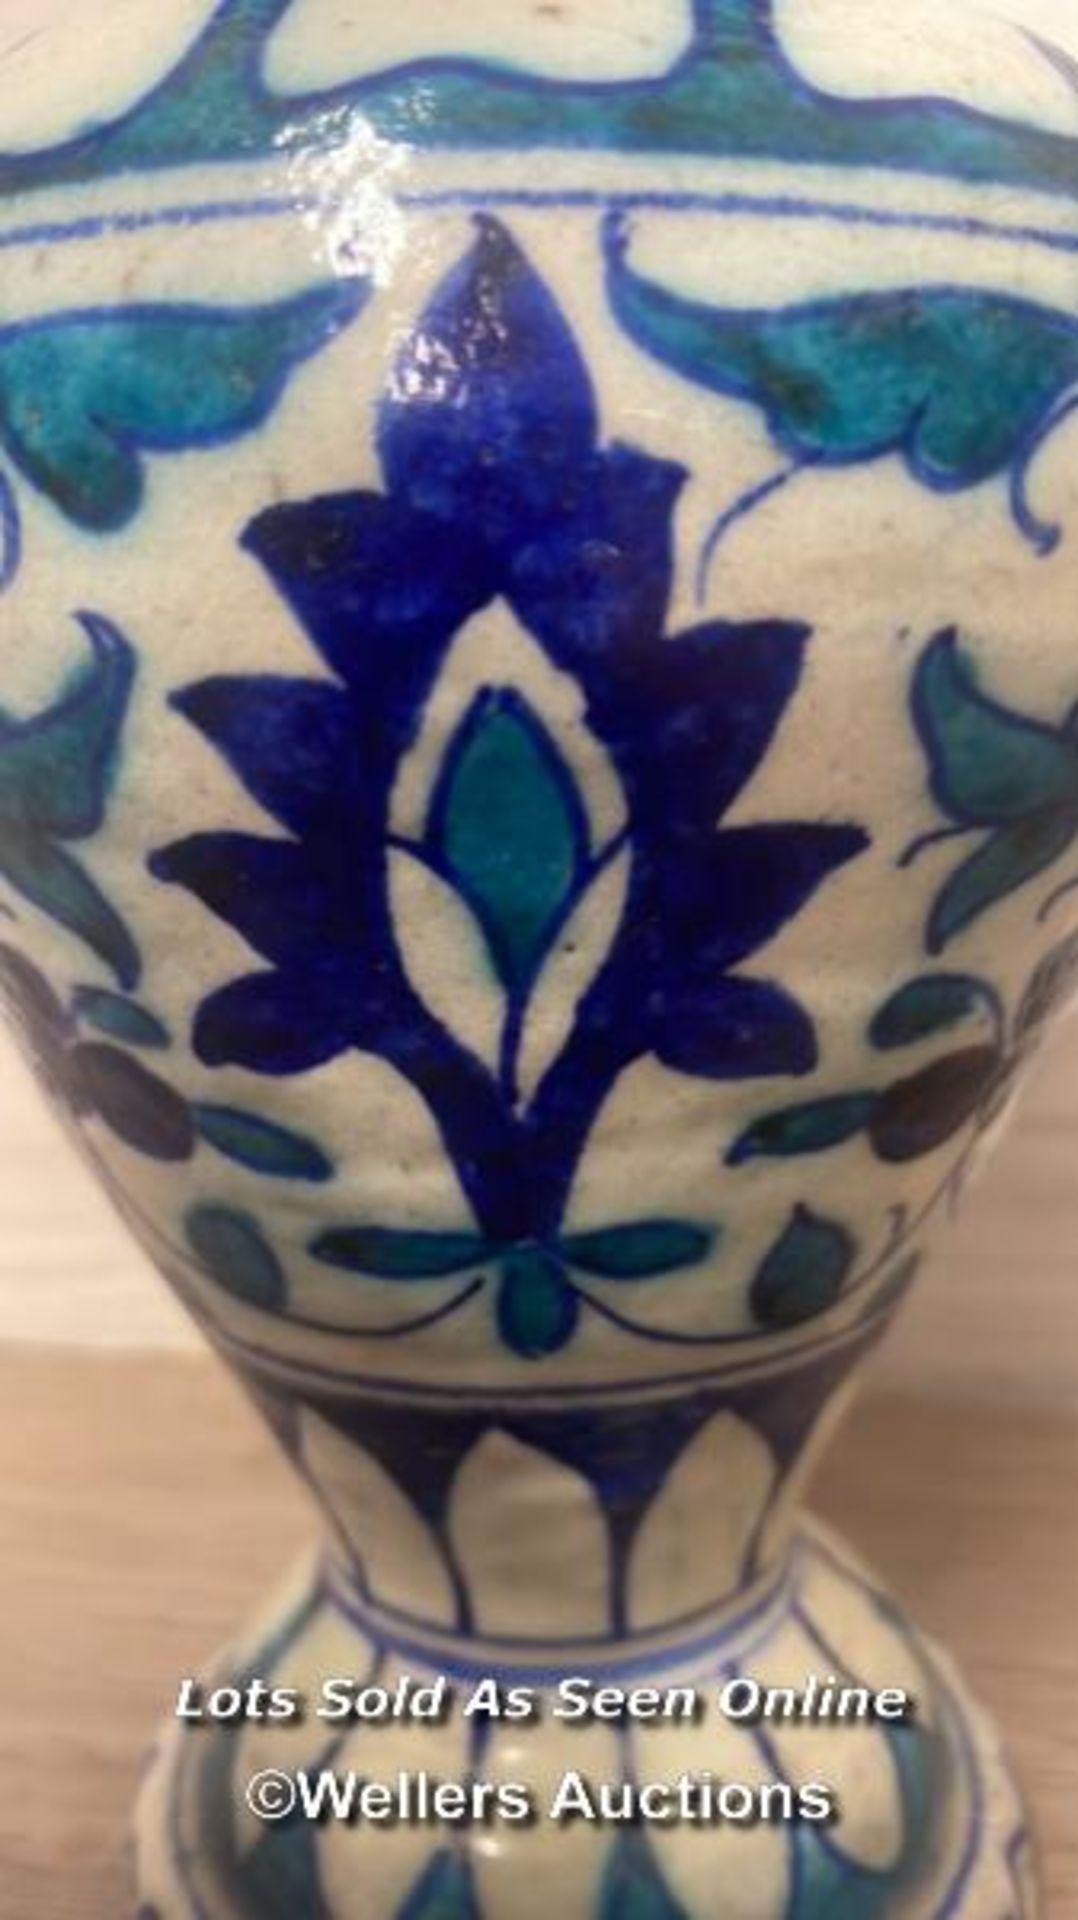 TWO SIMILAR MULTAN POTTERY VASES FROM PAKISTAN, HAND PAINTED BLUE & TURQUOISE FOLIAGE AND FLOWER - Bild 3 aus 15